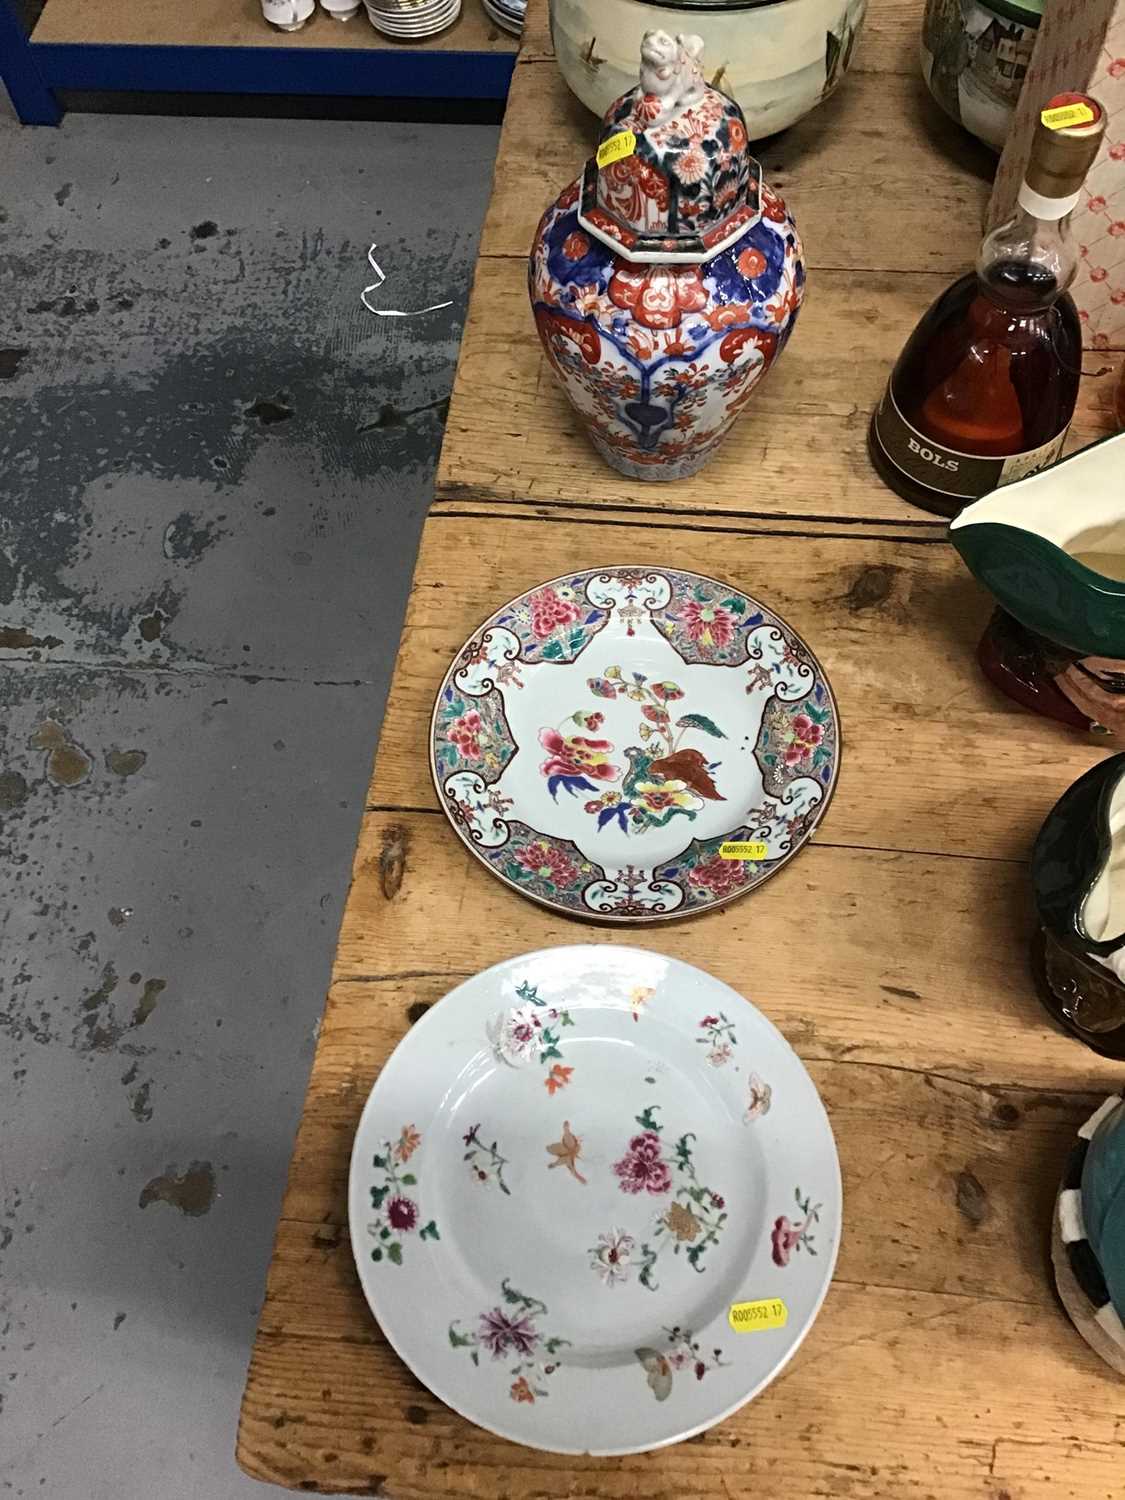 Lot 10 - Two 18th century Chinese export porcelain plates together with a 19th century Japanese Imari vase and cover (3)